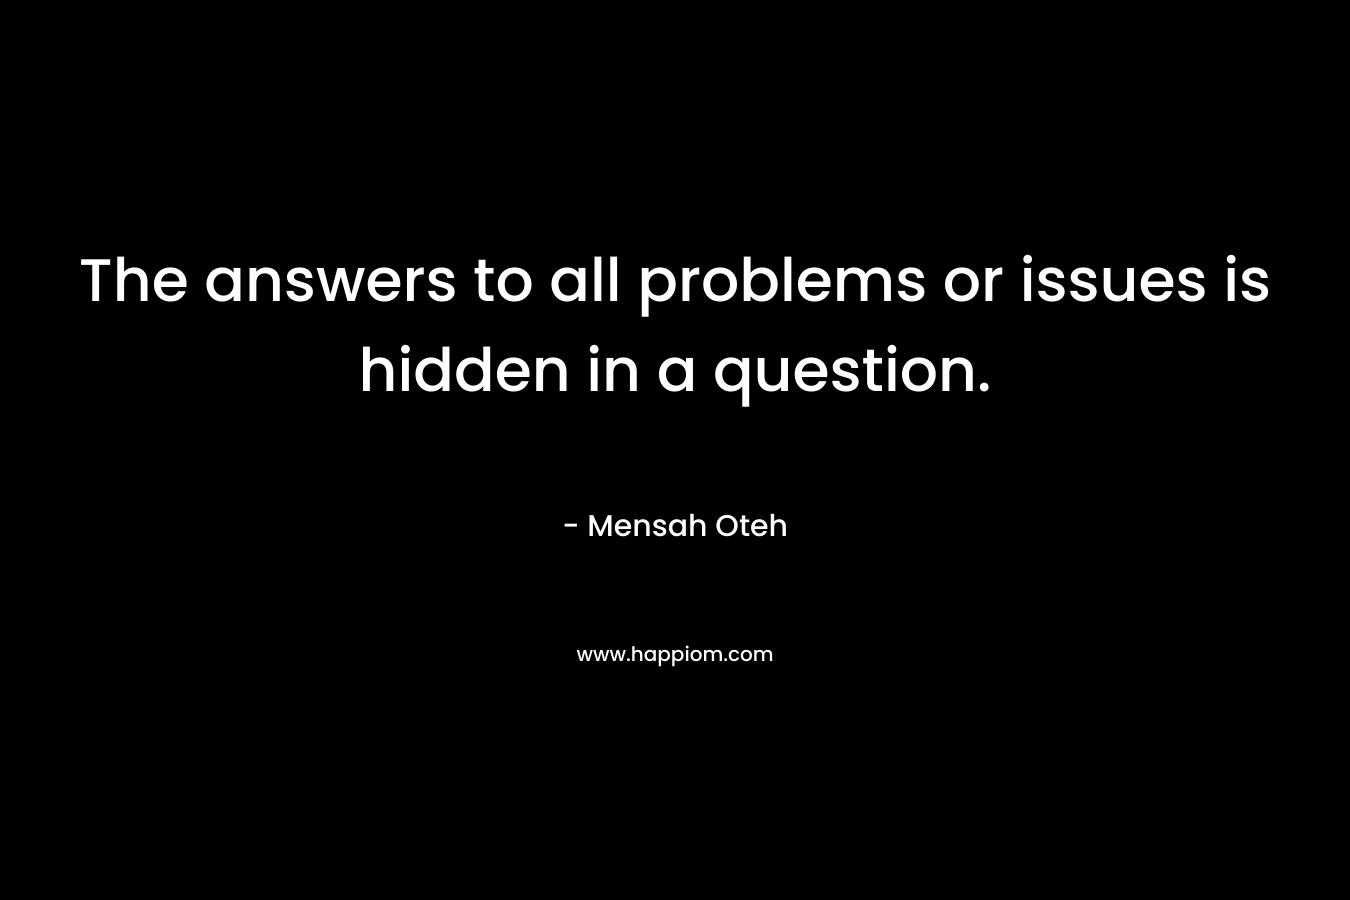 The answers to all problems or issues is hidden in a question.